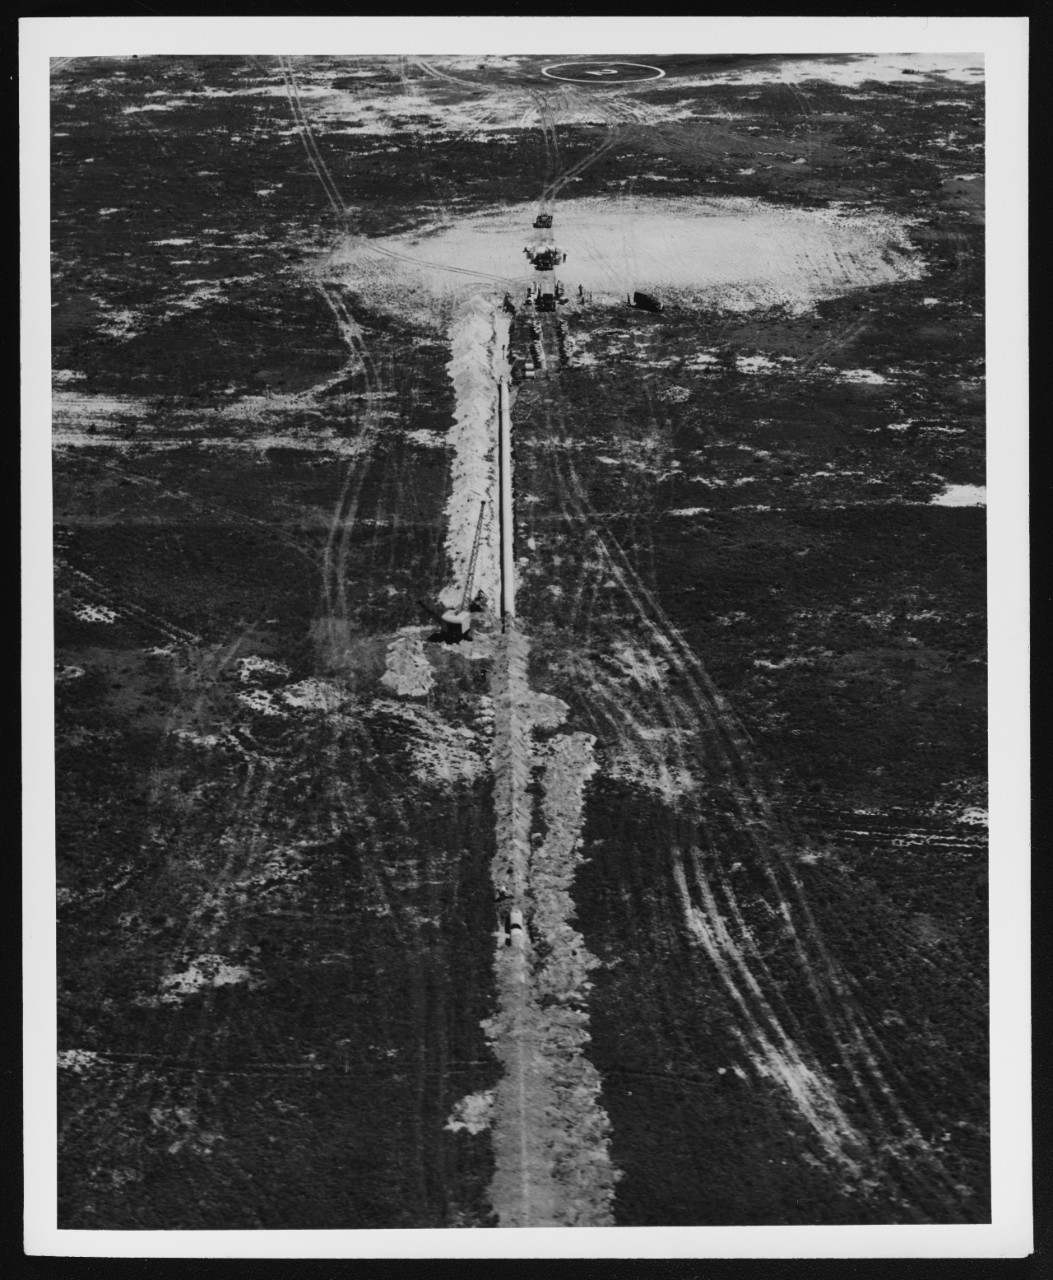 Storm sewer for flying field, U.S. Naval Air Station, Lakehurst, New Jersey